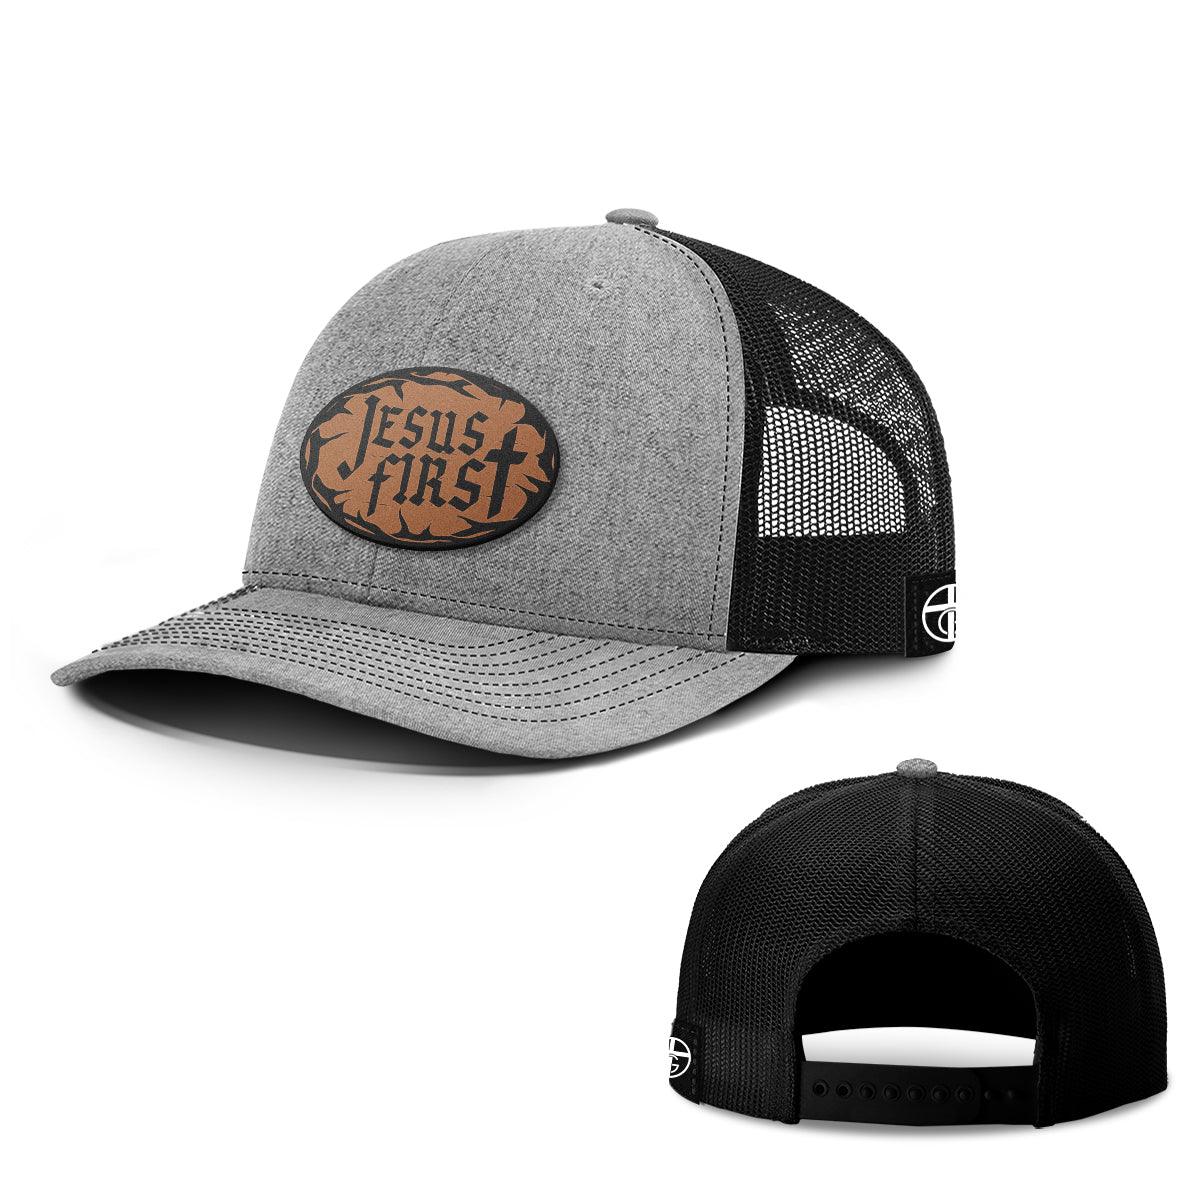 Jesus First Leather Patch Hats